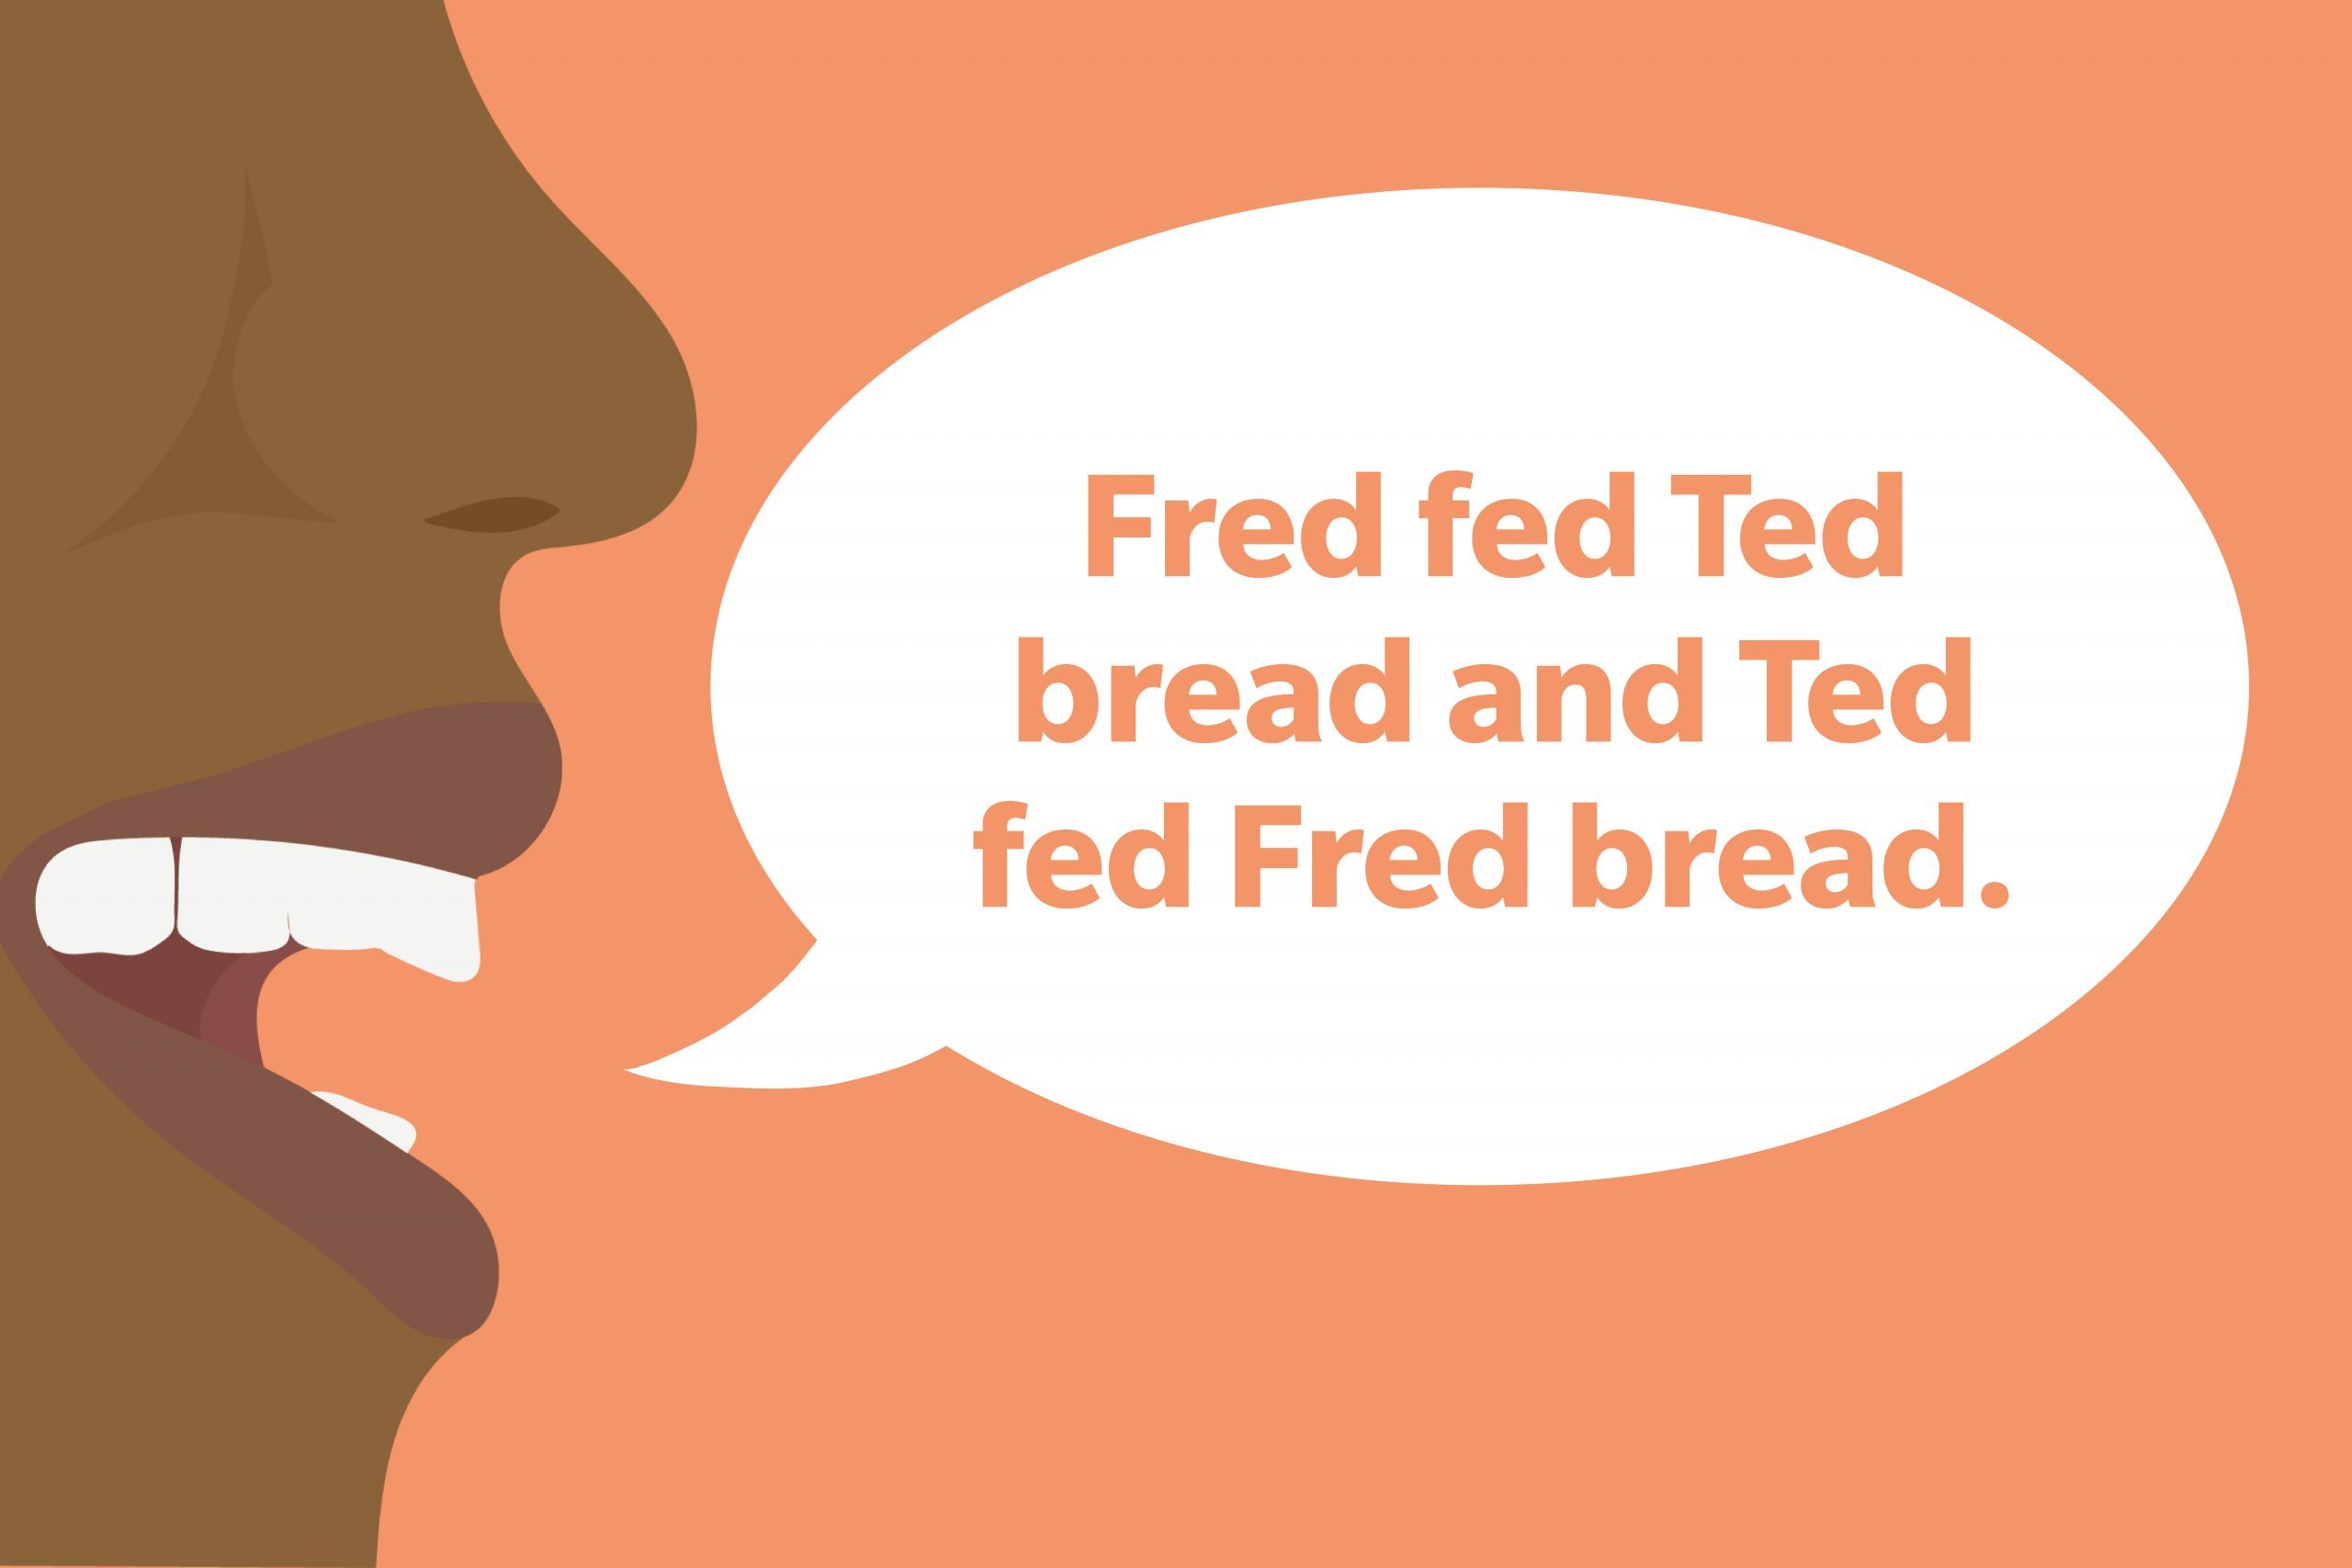 Tongue Twister: Fred fed Ted bread and Ted fed Fred bread.